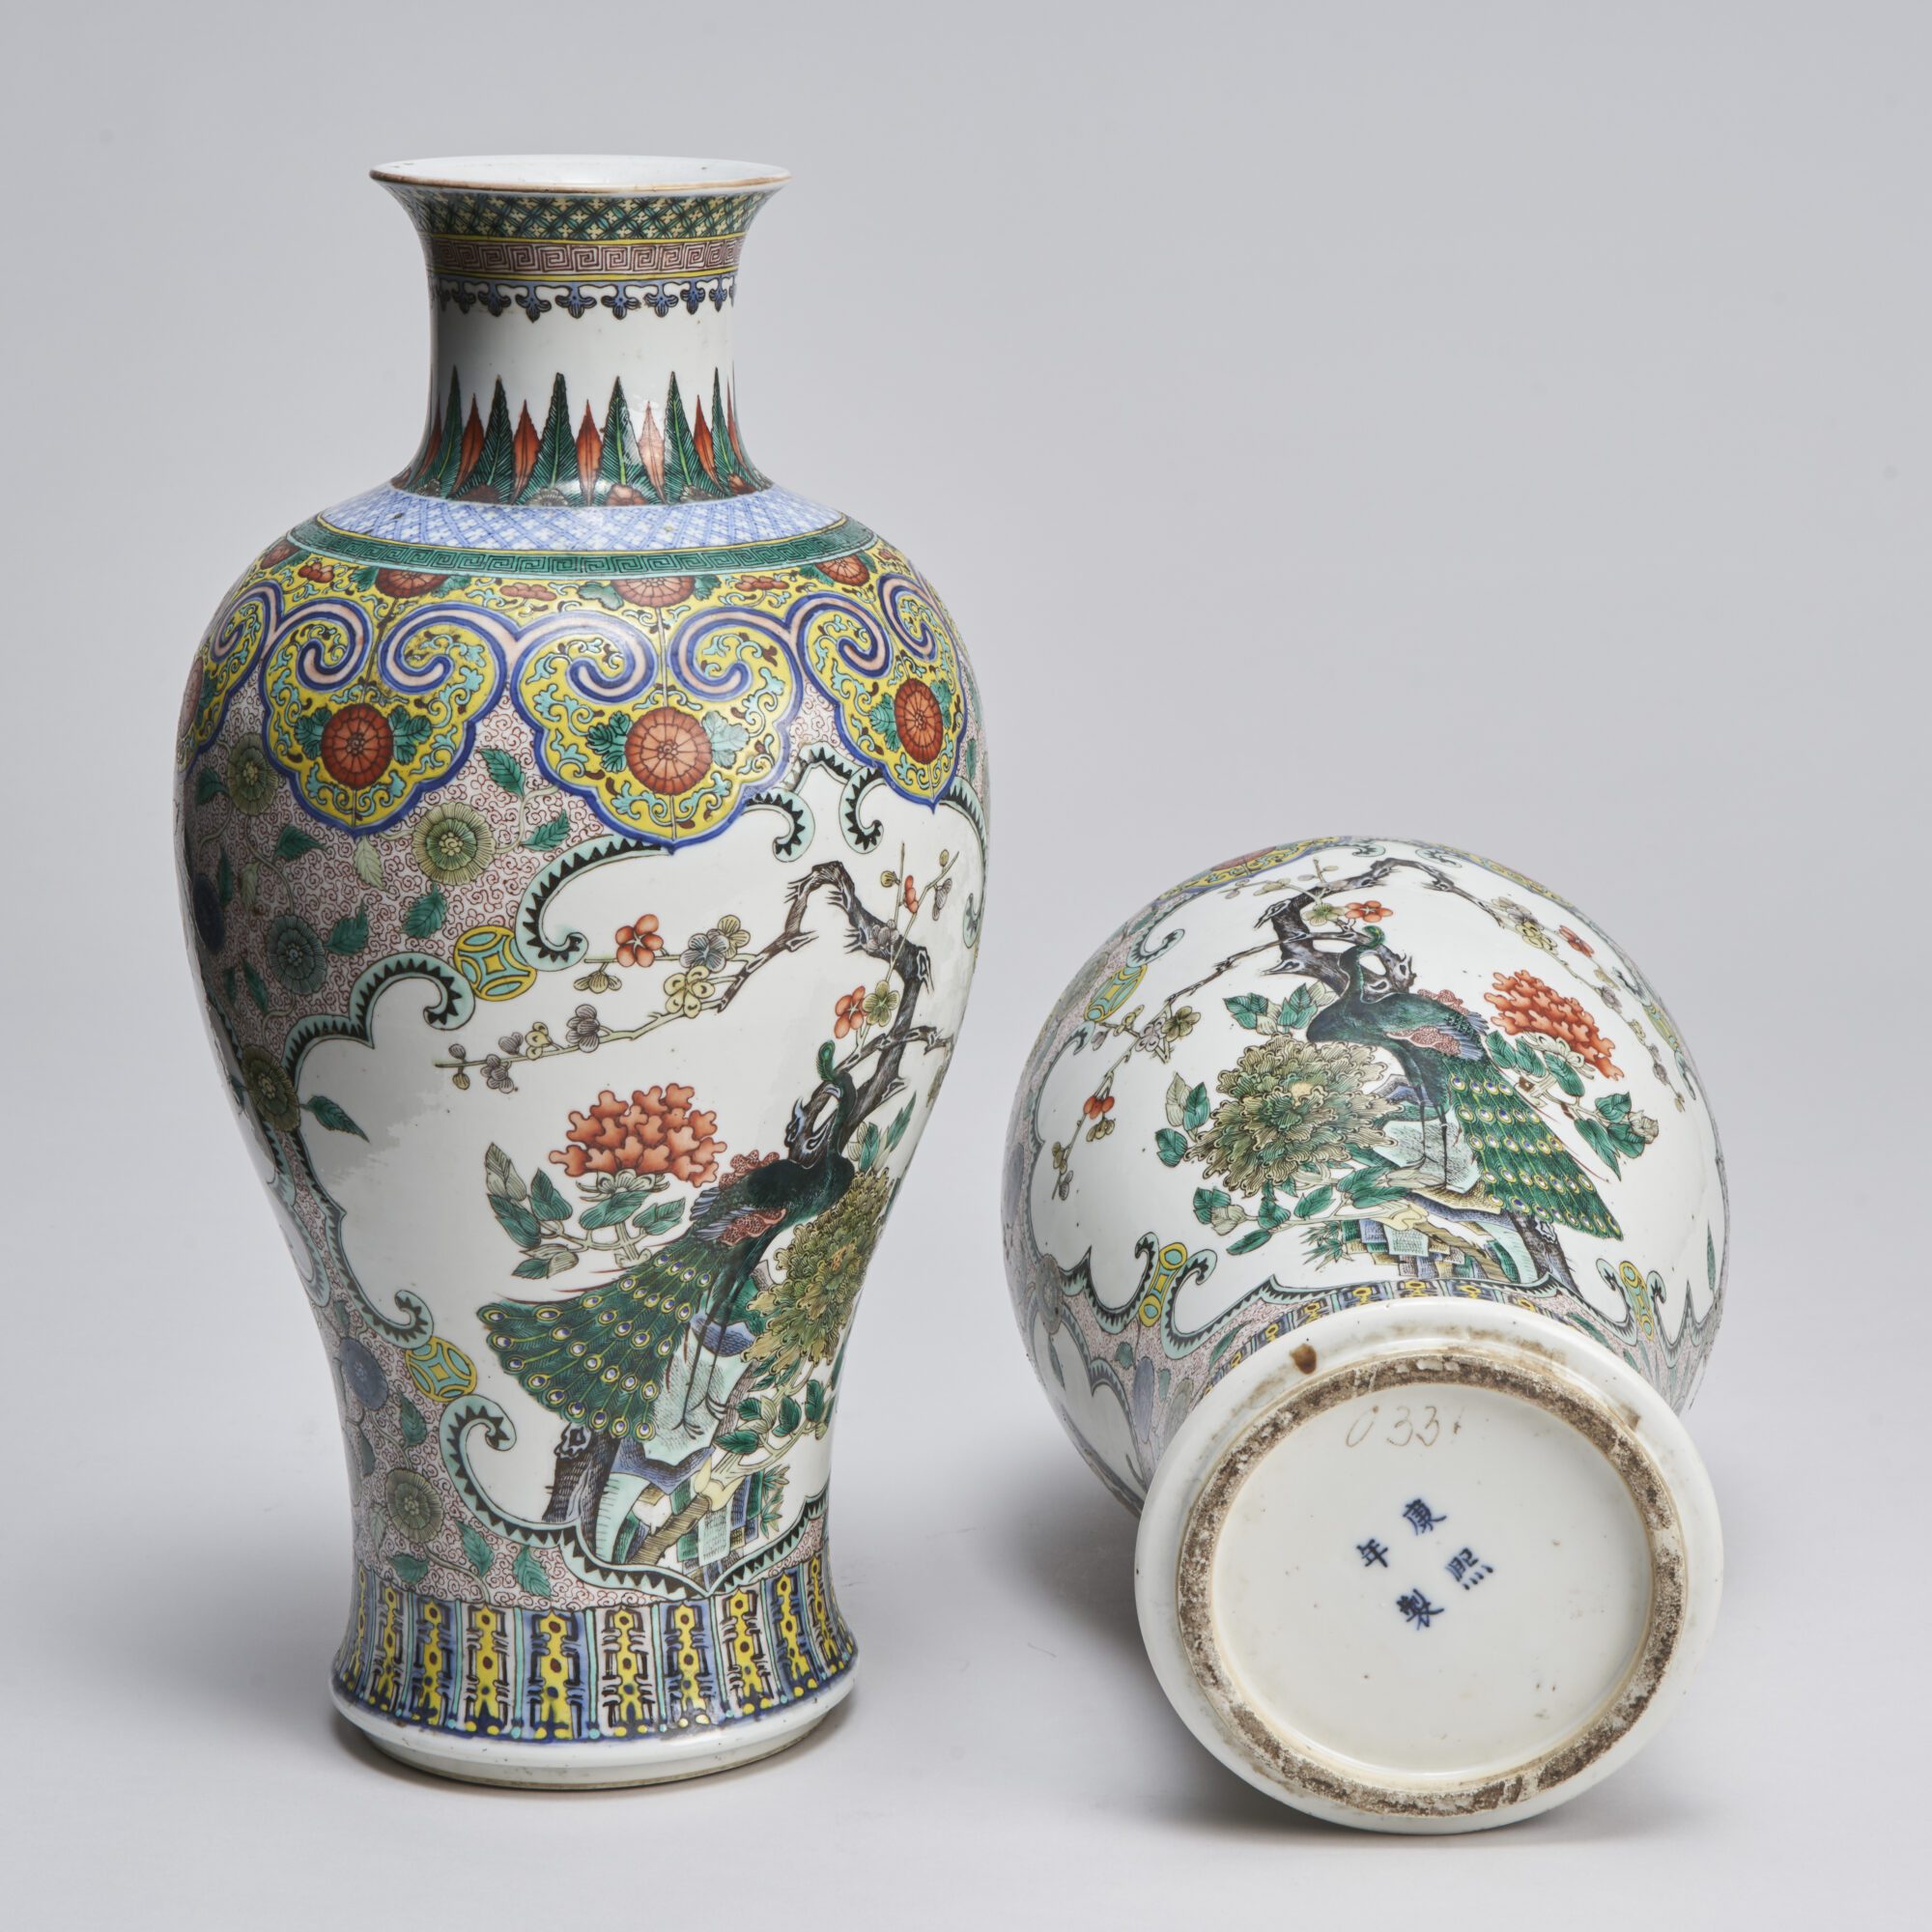 An attractive pair of Nineteenth Century Chinese Famille Verte porcelain vases from Kevin Page